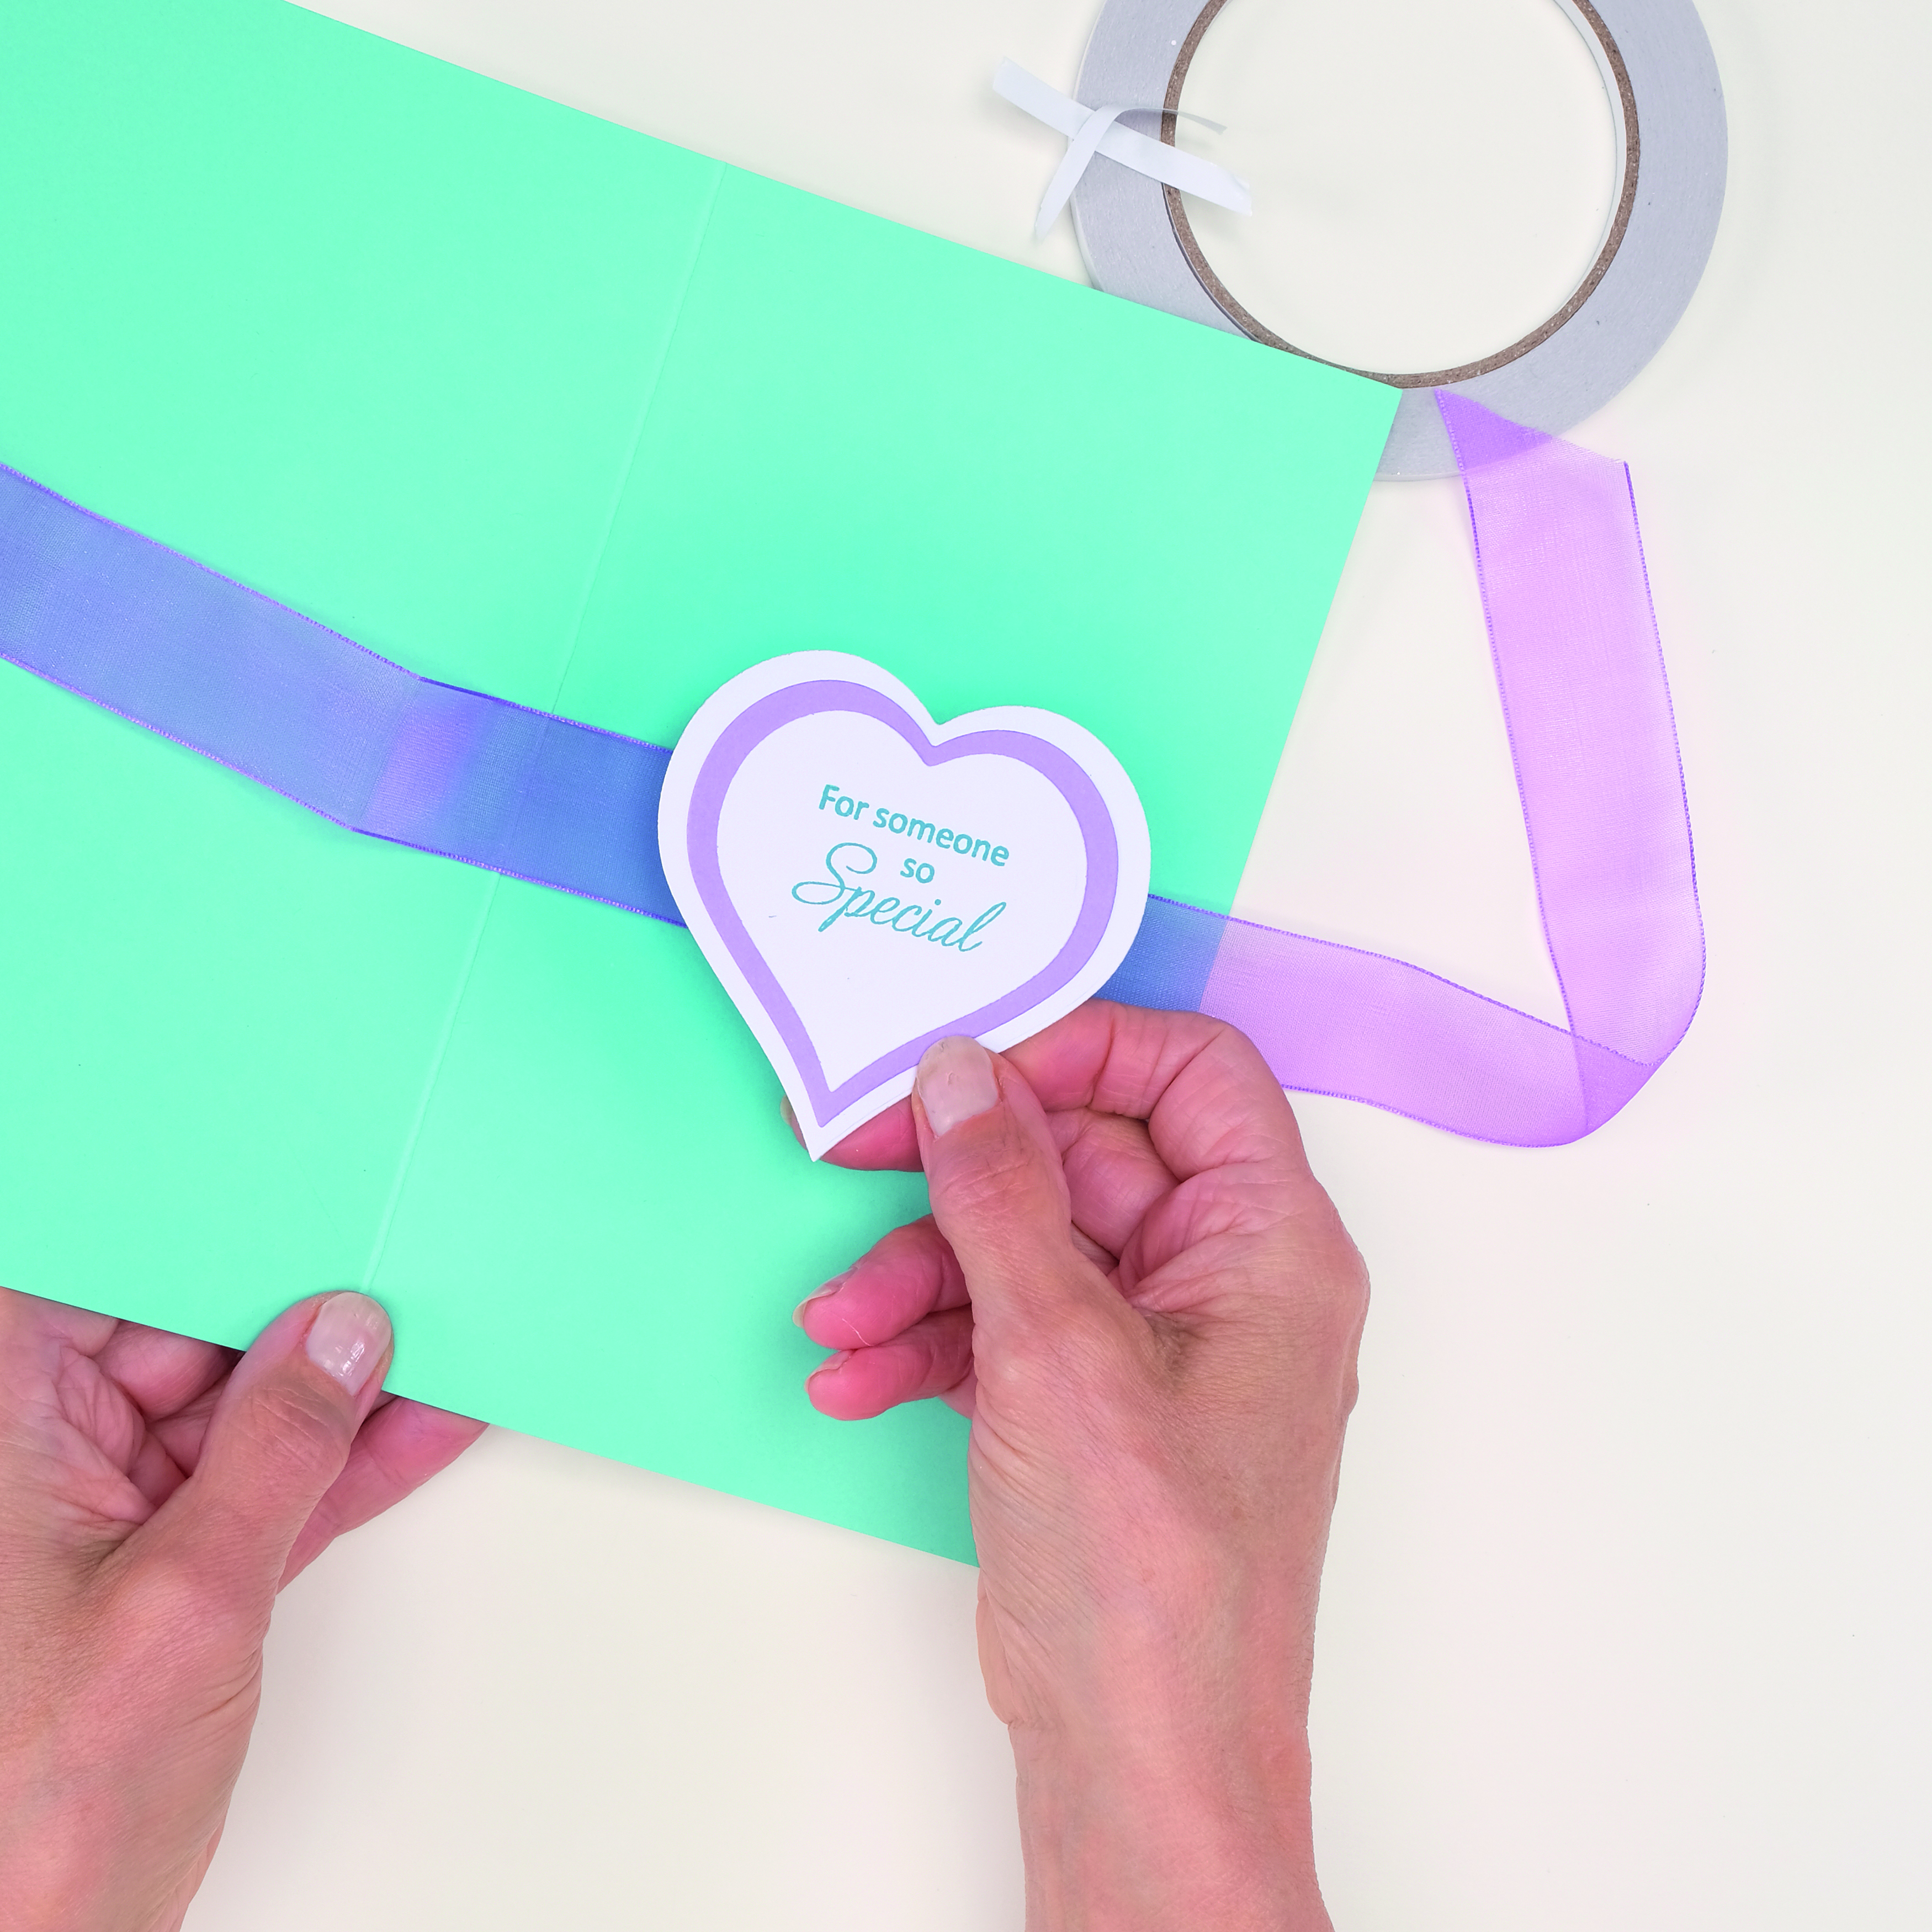 How to make a pop-up birthday card – step 2